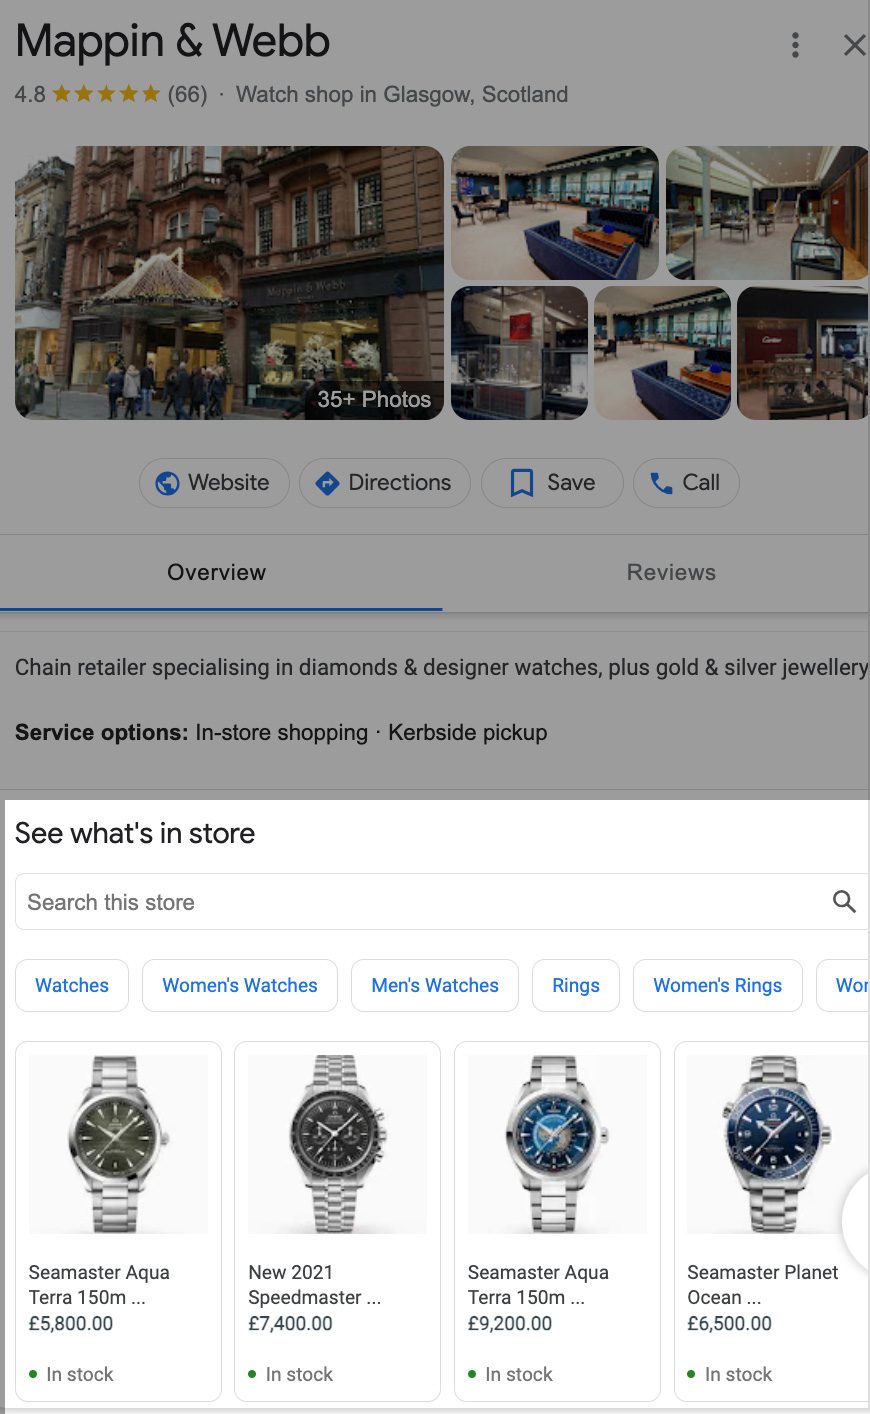 optimising your google business profile with category specific product options